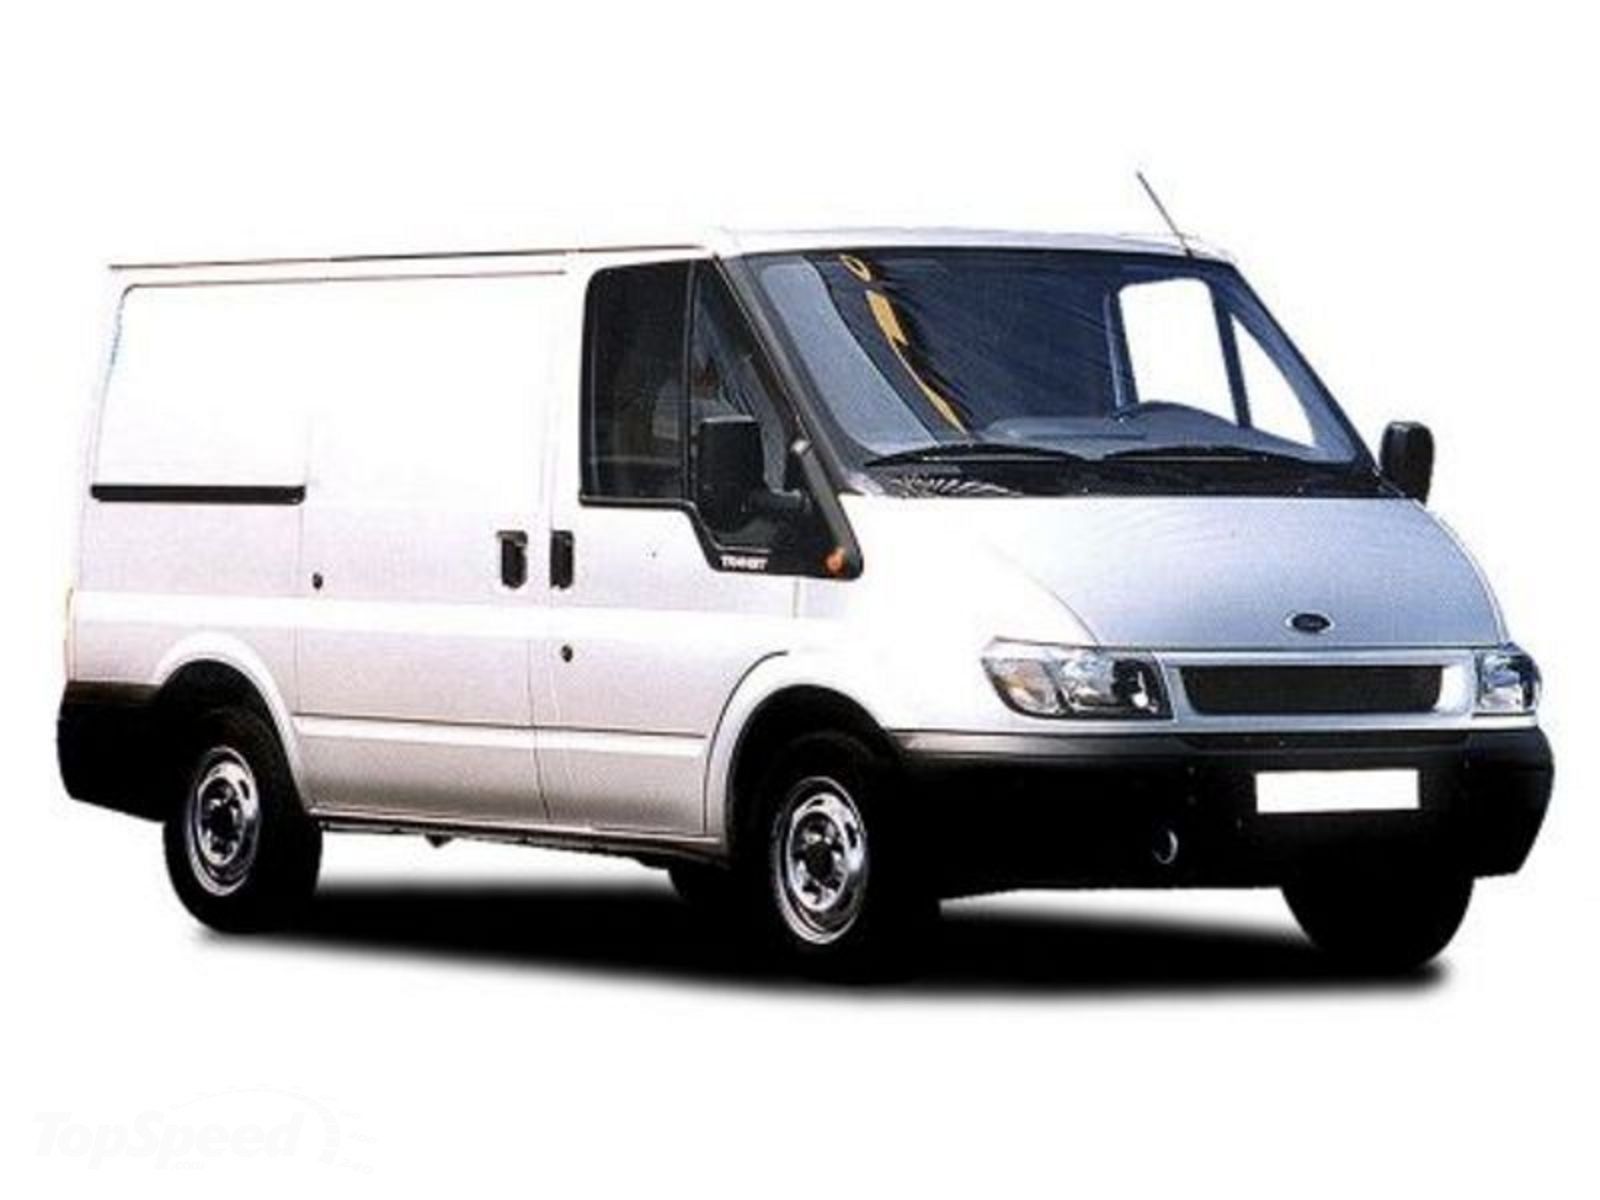 Форд транзит 2.0 2000 2006. Ford Transit 2000. Ford Transit '2000–06. Ford Transit Transit 2006. Ford Transit 06.